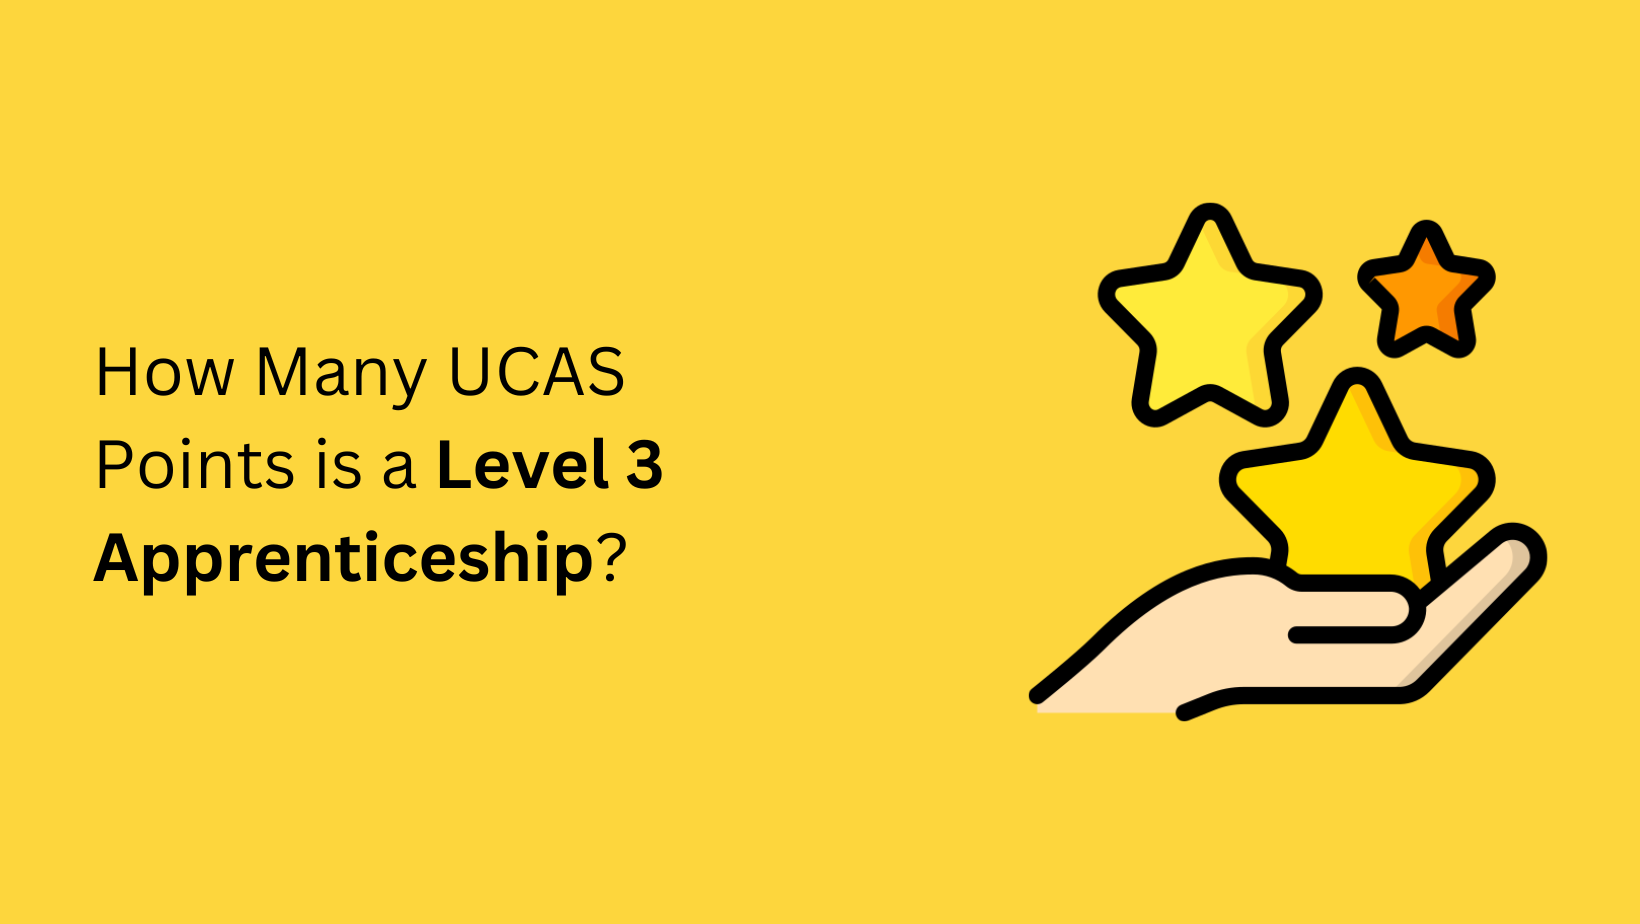 How Many UCAS Points is a Level 3 Apprenticeship